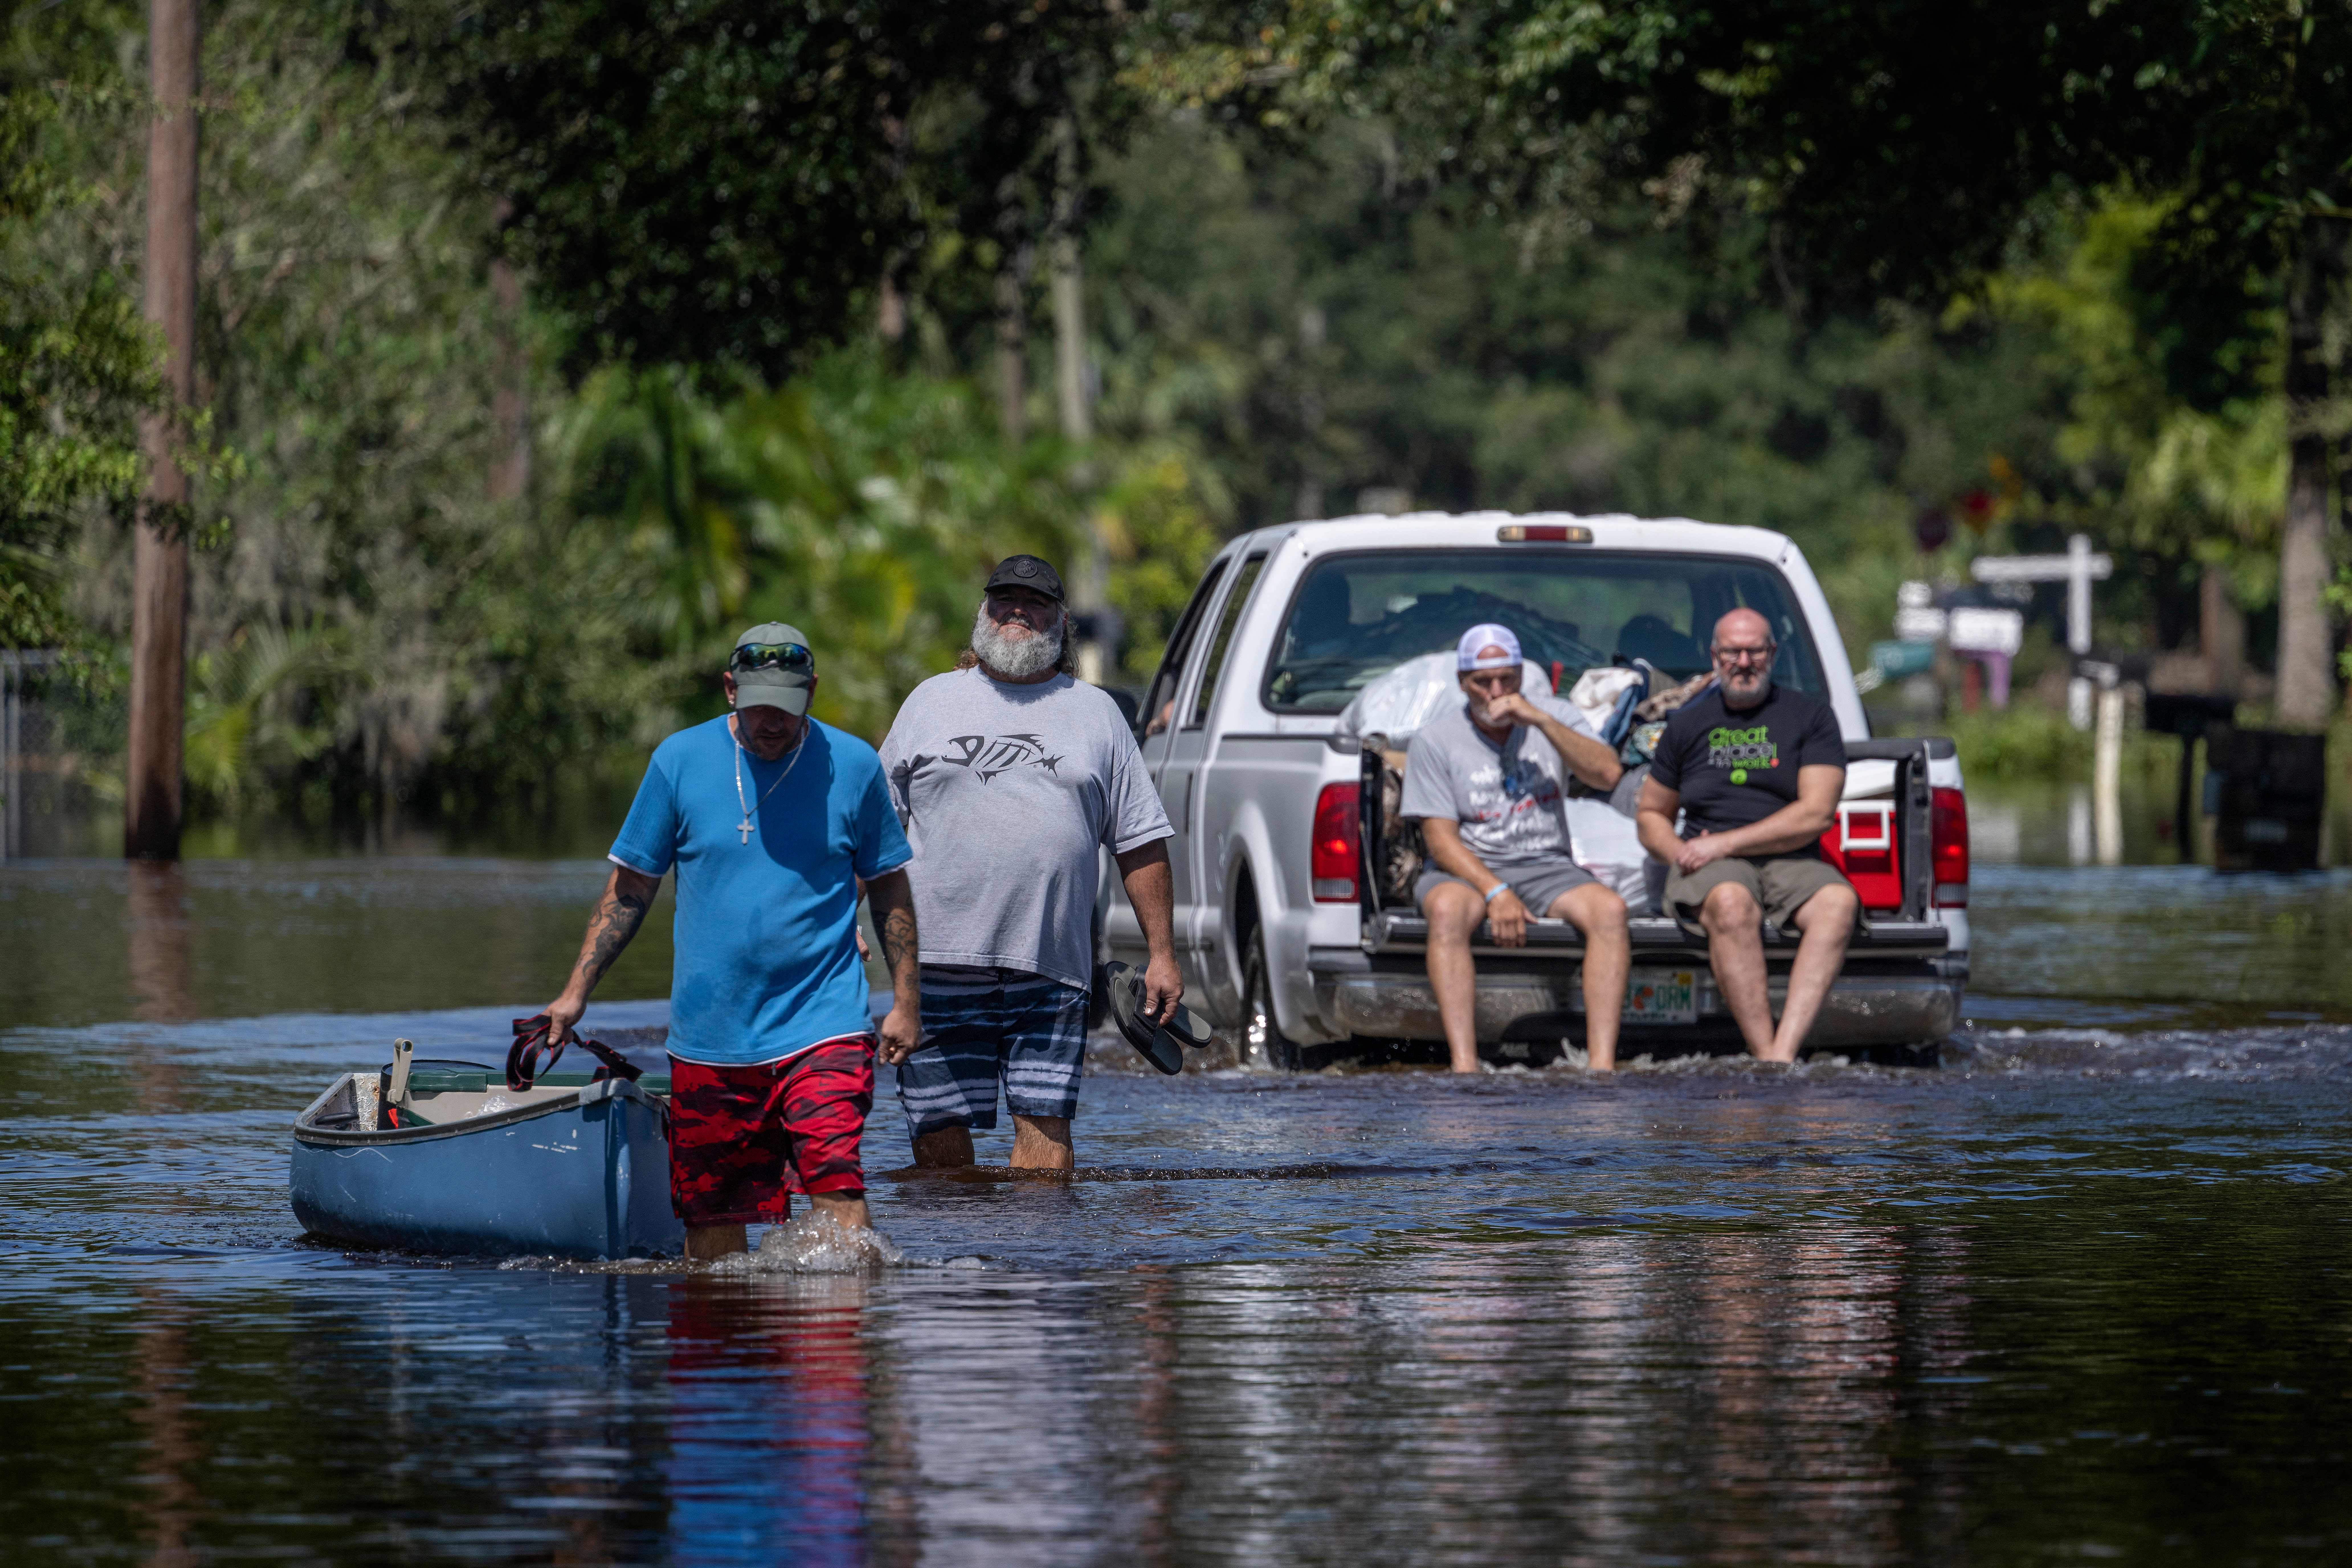 A man tows a canoe through a flooded street of his neighborhood as a truck passes in New Smyrna Beach, Florida, on Sept. 30, 2022, after Hurricane Ian slammed the area. Credit: Jim Watson/AFP via Getty Images